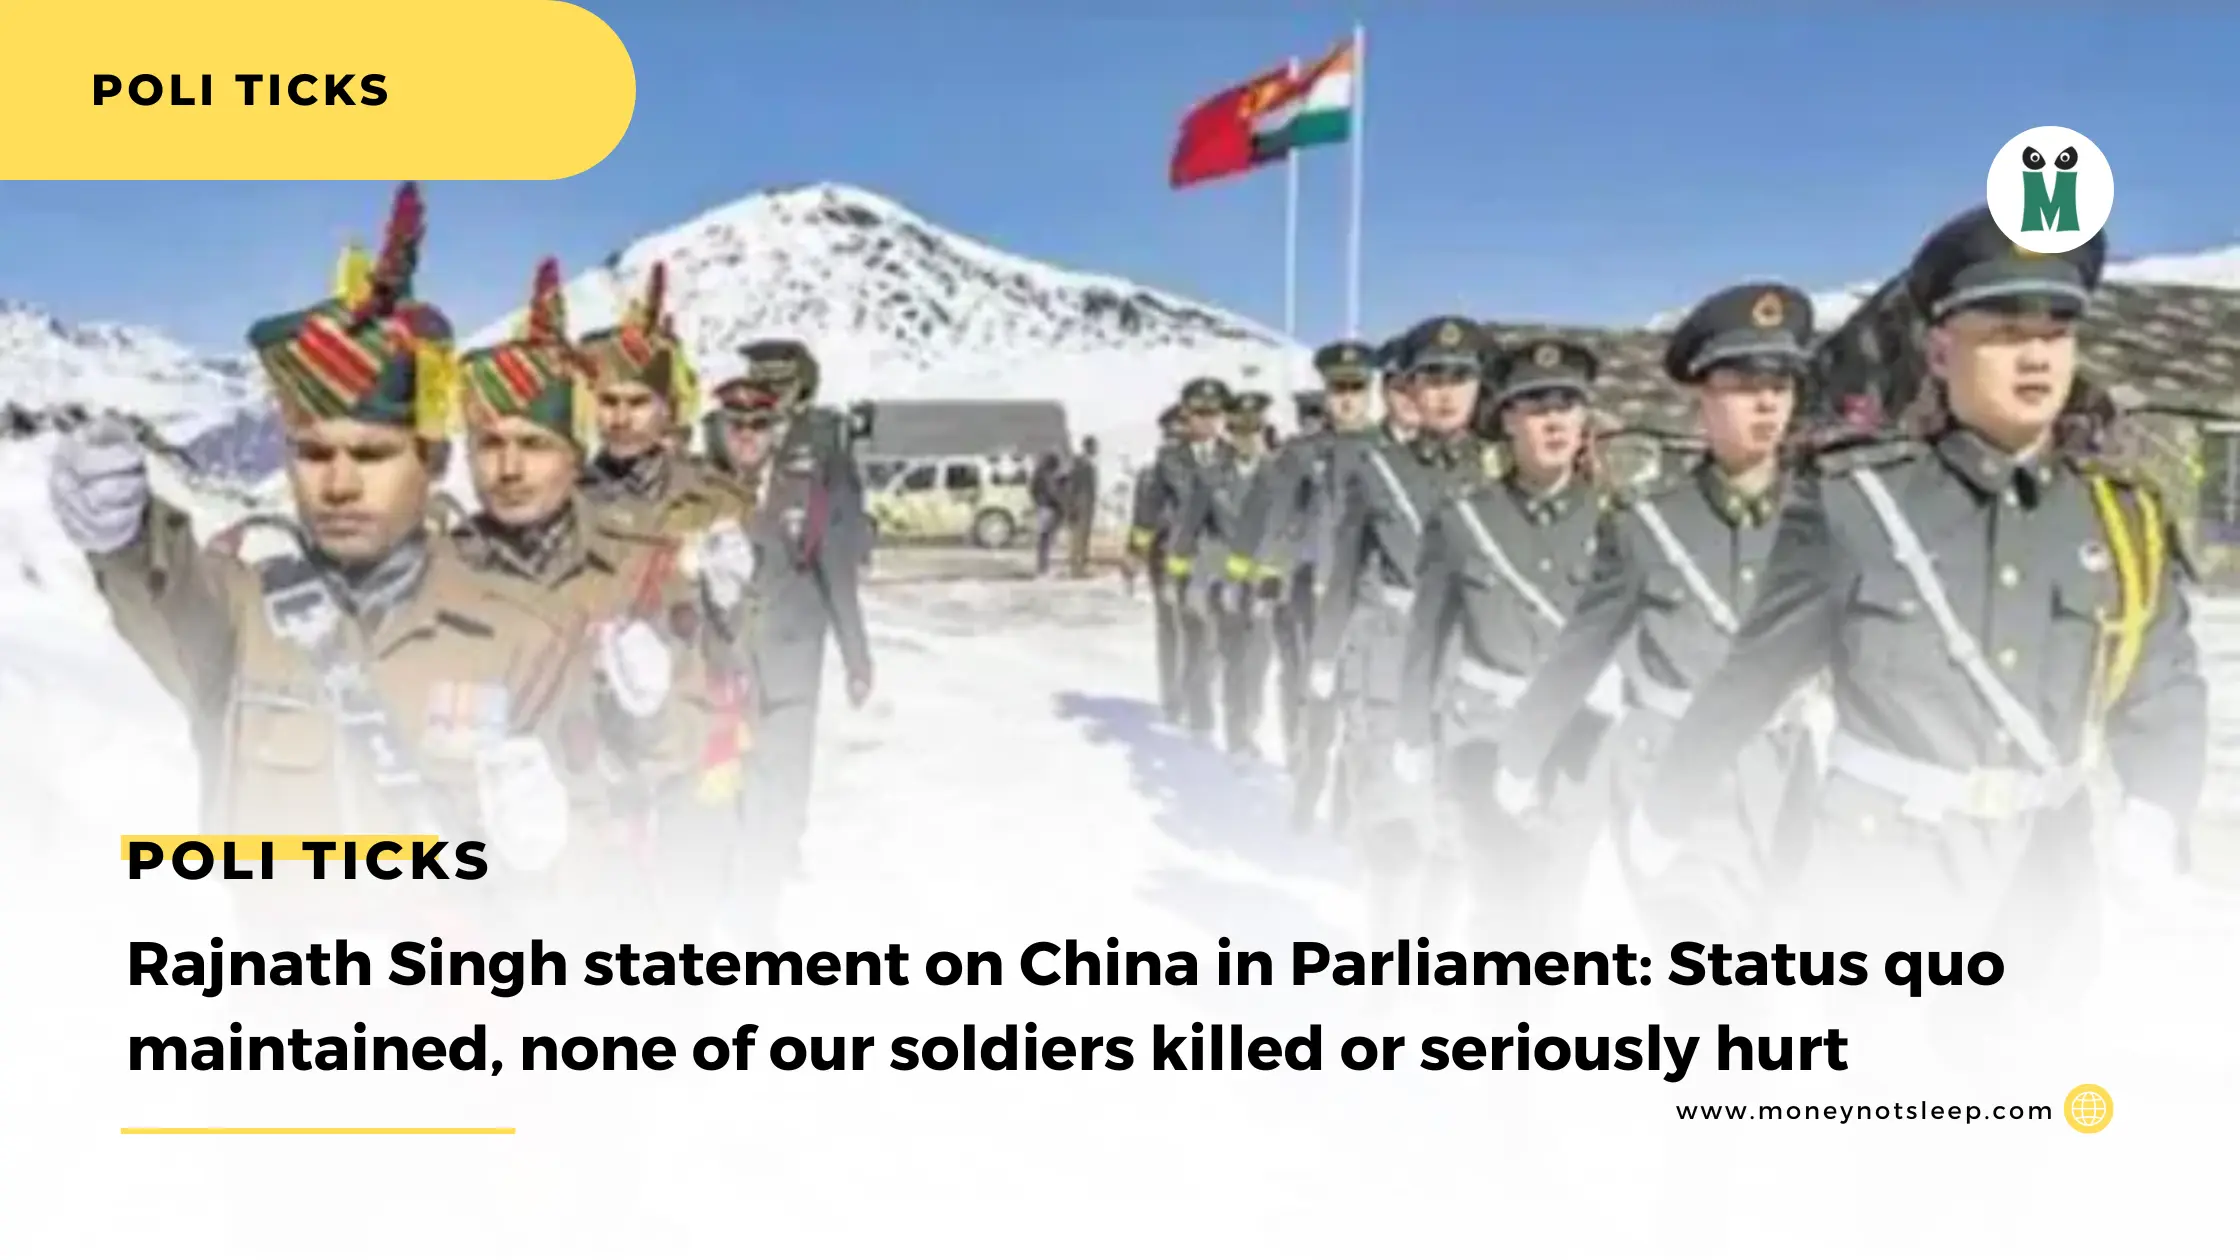 Rajnath Singh statement on China in Parliament: Status quo maintained, none of our soldiers killed or seriously hurt